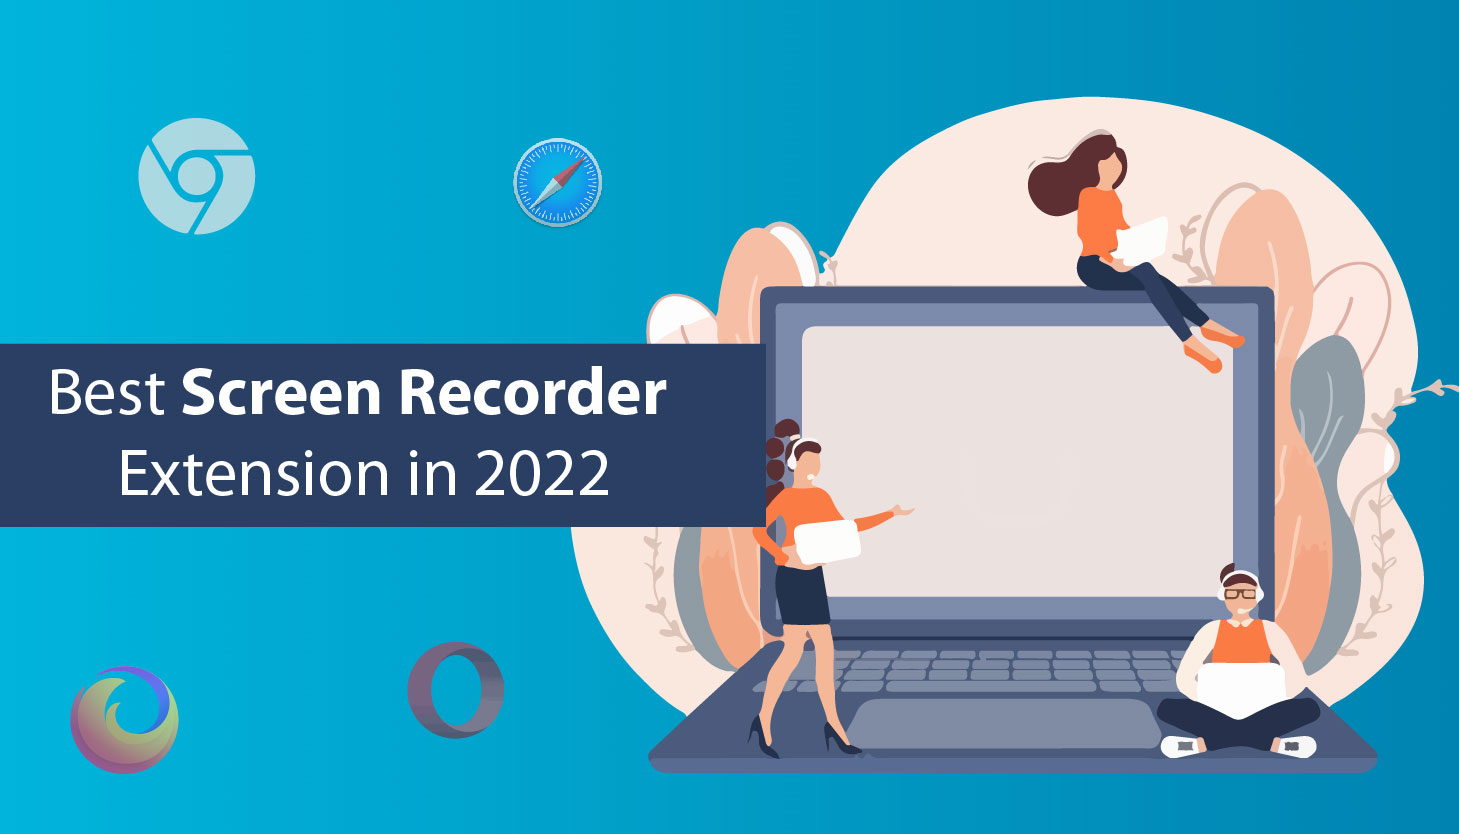  Best Screen Recorder Extension in 2022